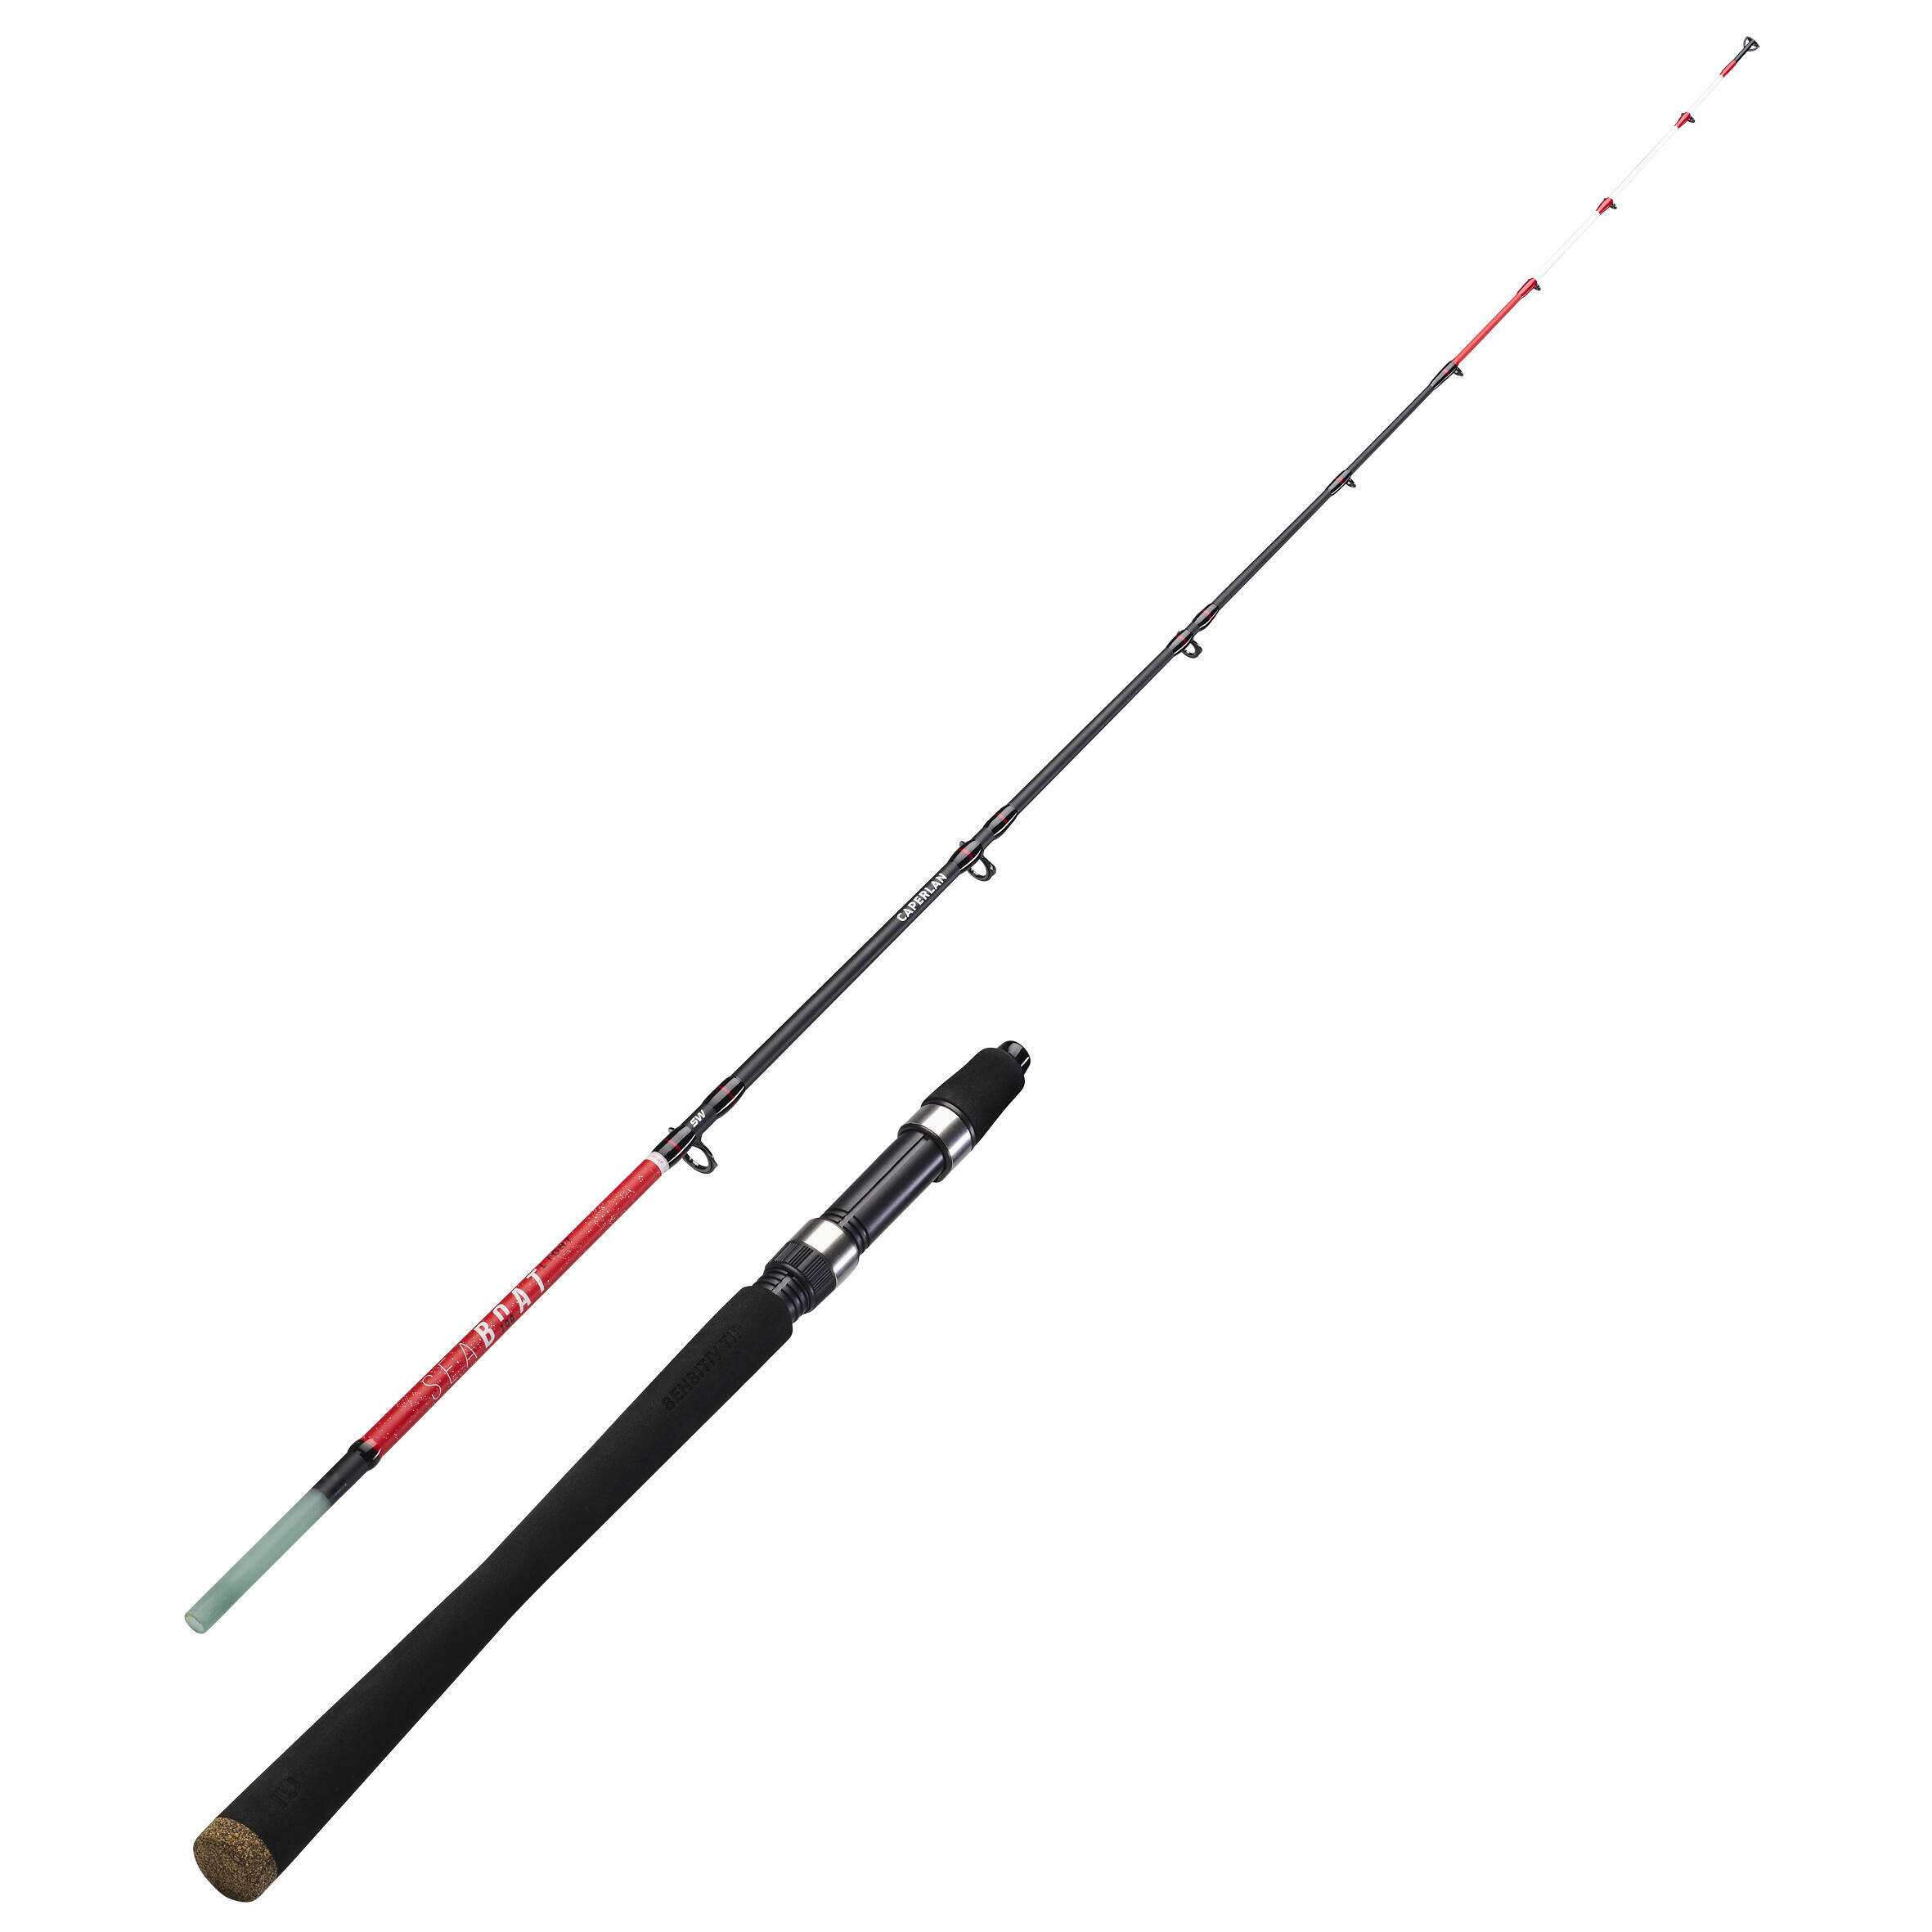 Decathlon Caperlan Seaboat-5 240/4 Travel Saltwater Fishing Rod with AXION  reel 3000, Sports Equipment, Fishing on Carousell